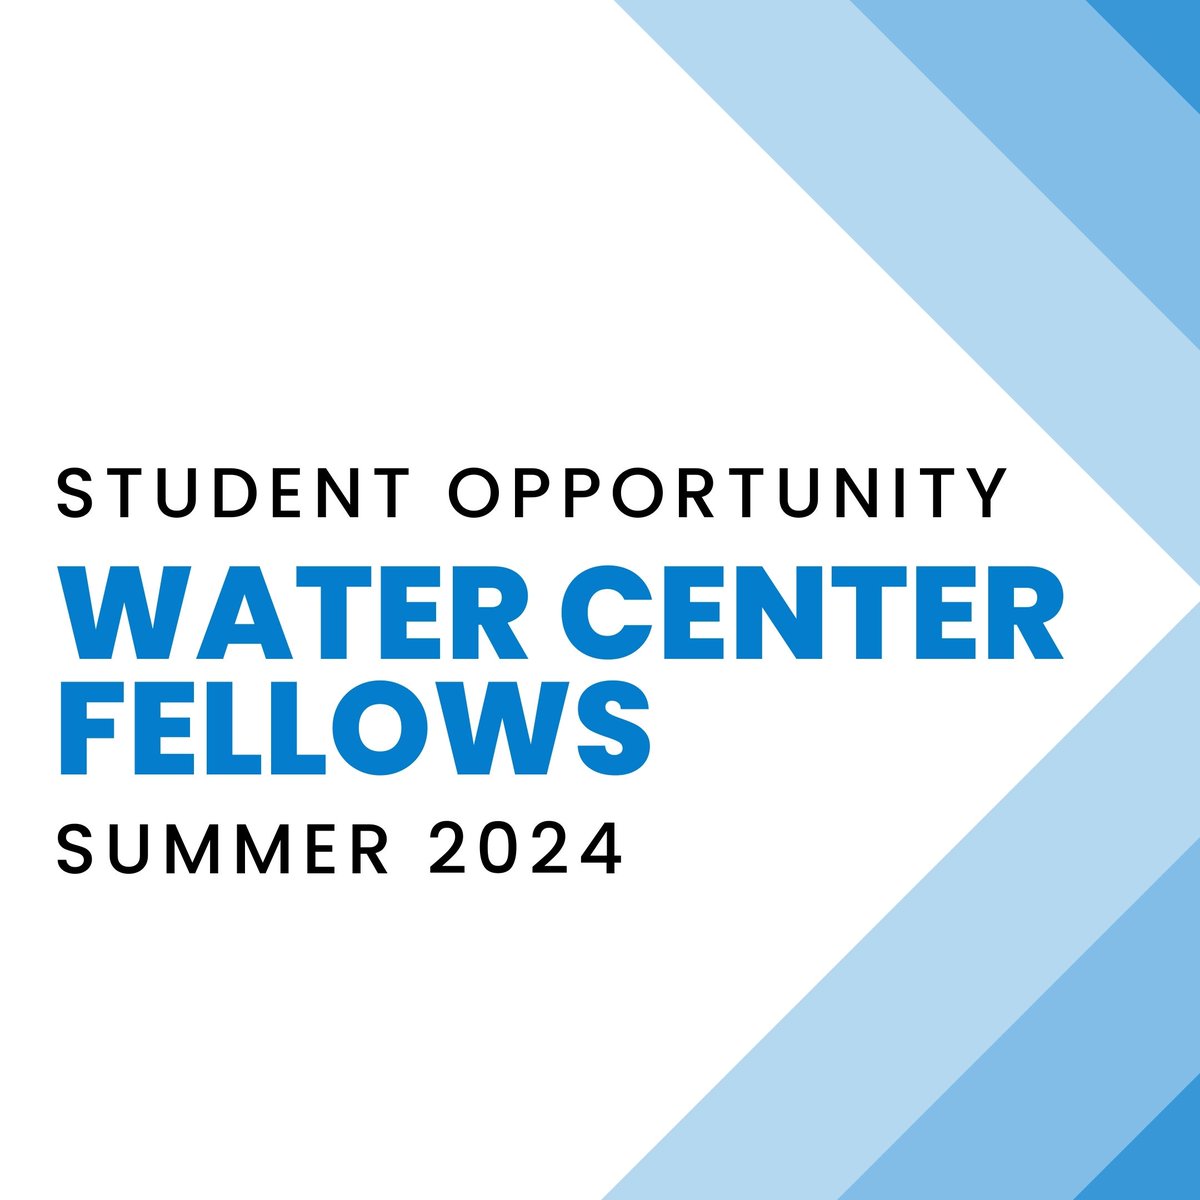 Get hands-on experience working on water-related projects! Over an 11-week span, undergraduate students will receive a salary & present a poster at the AWRC conference on July 16-18. View the link below for more information: mailchi.mp/66ad4fb02f67/r…]